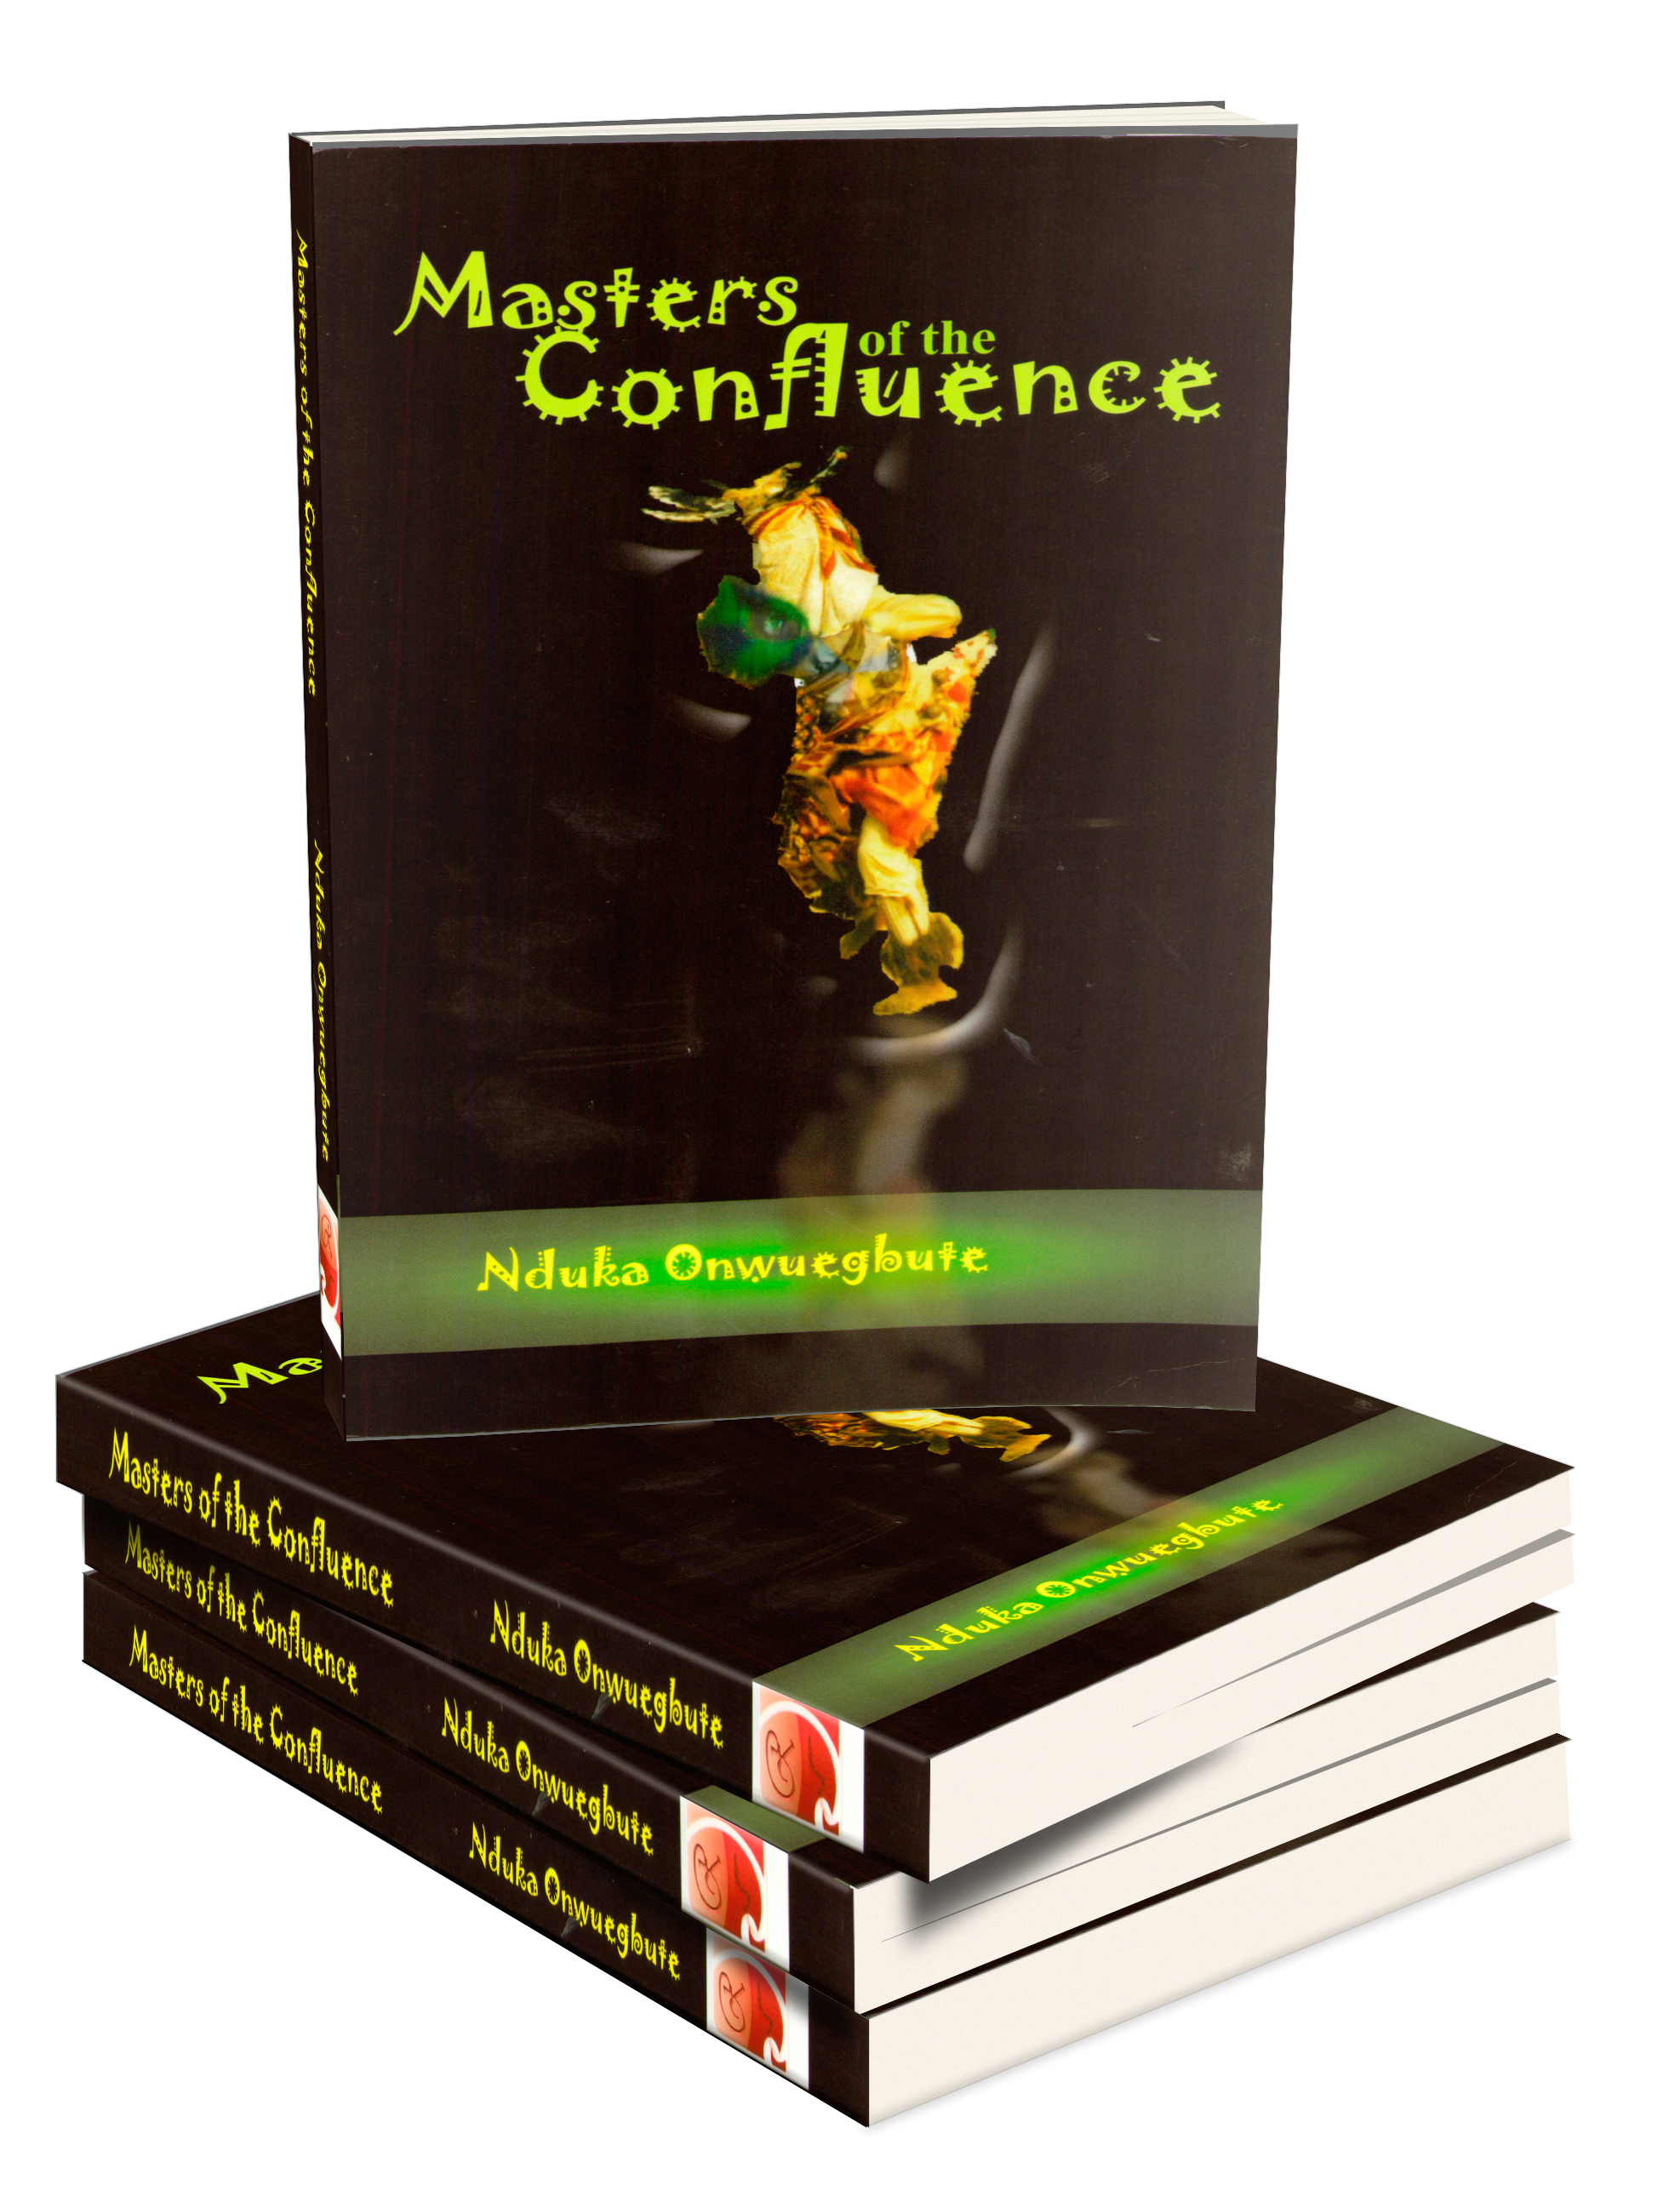 Historical Fiction: 'Masters of the Confluence' by Nduka Onwuegbute